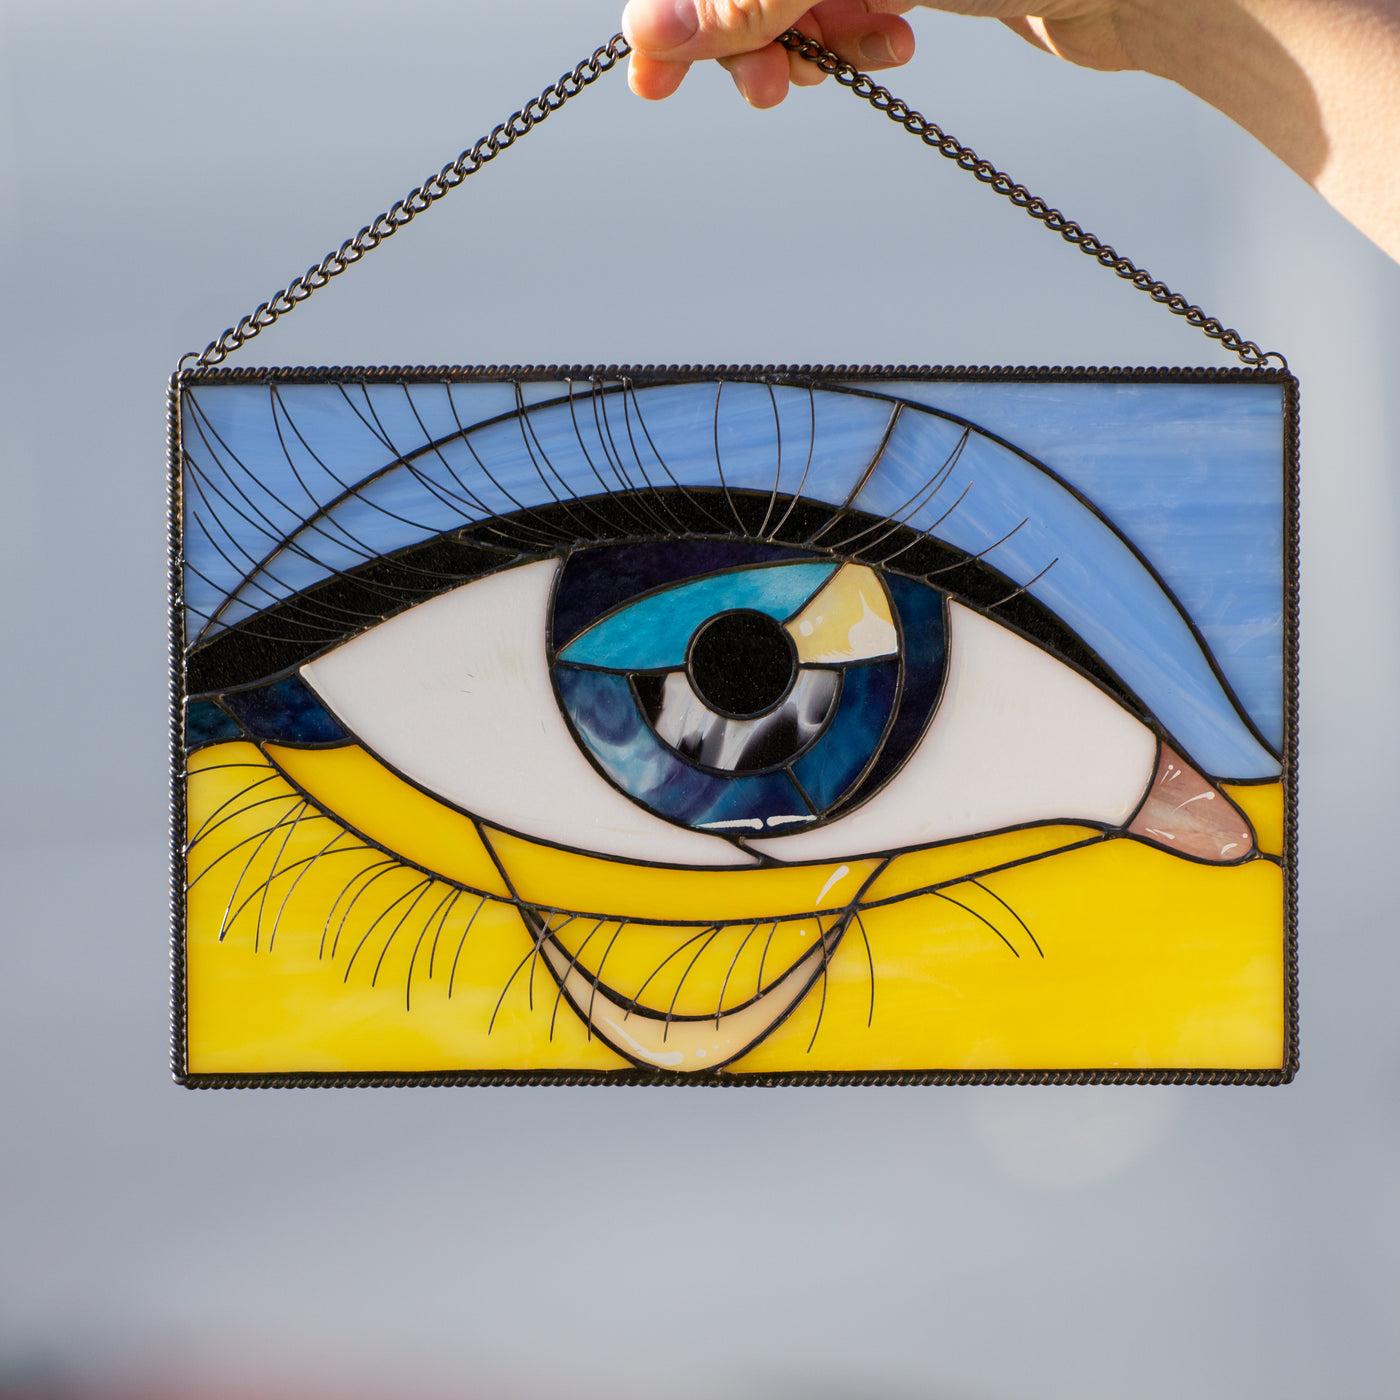 Stained glass window panel depicting Ukrainian flag and a crying eye in the middle